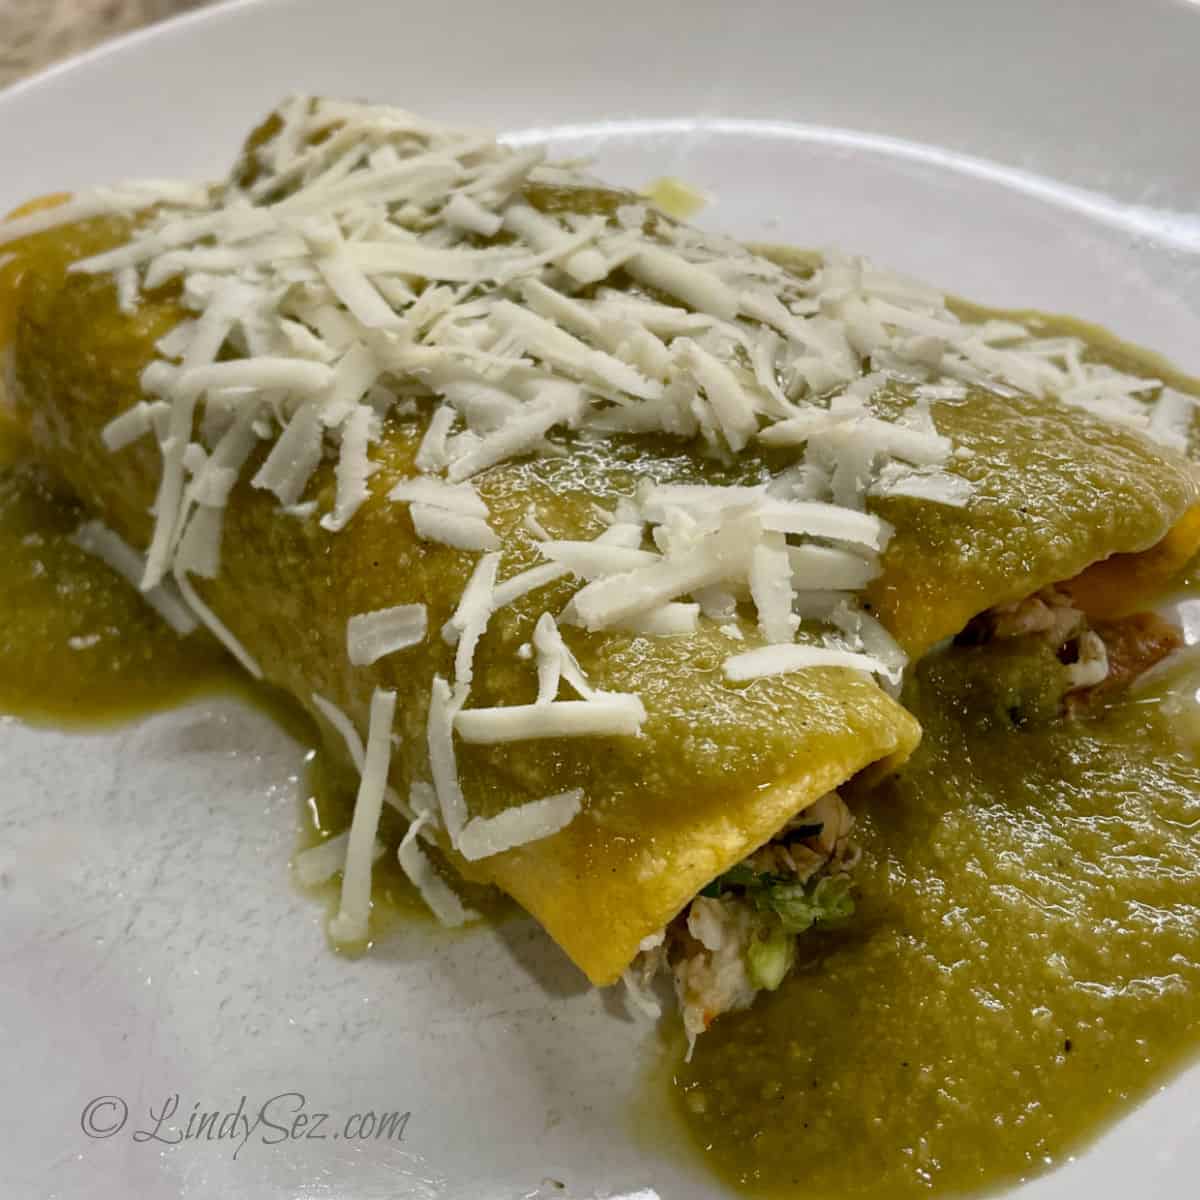 A plate with two crab enchiladas with green sauce.